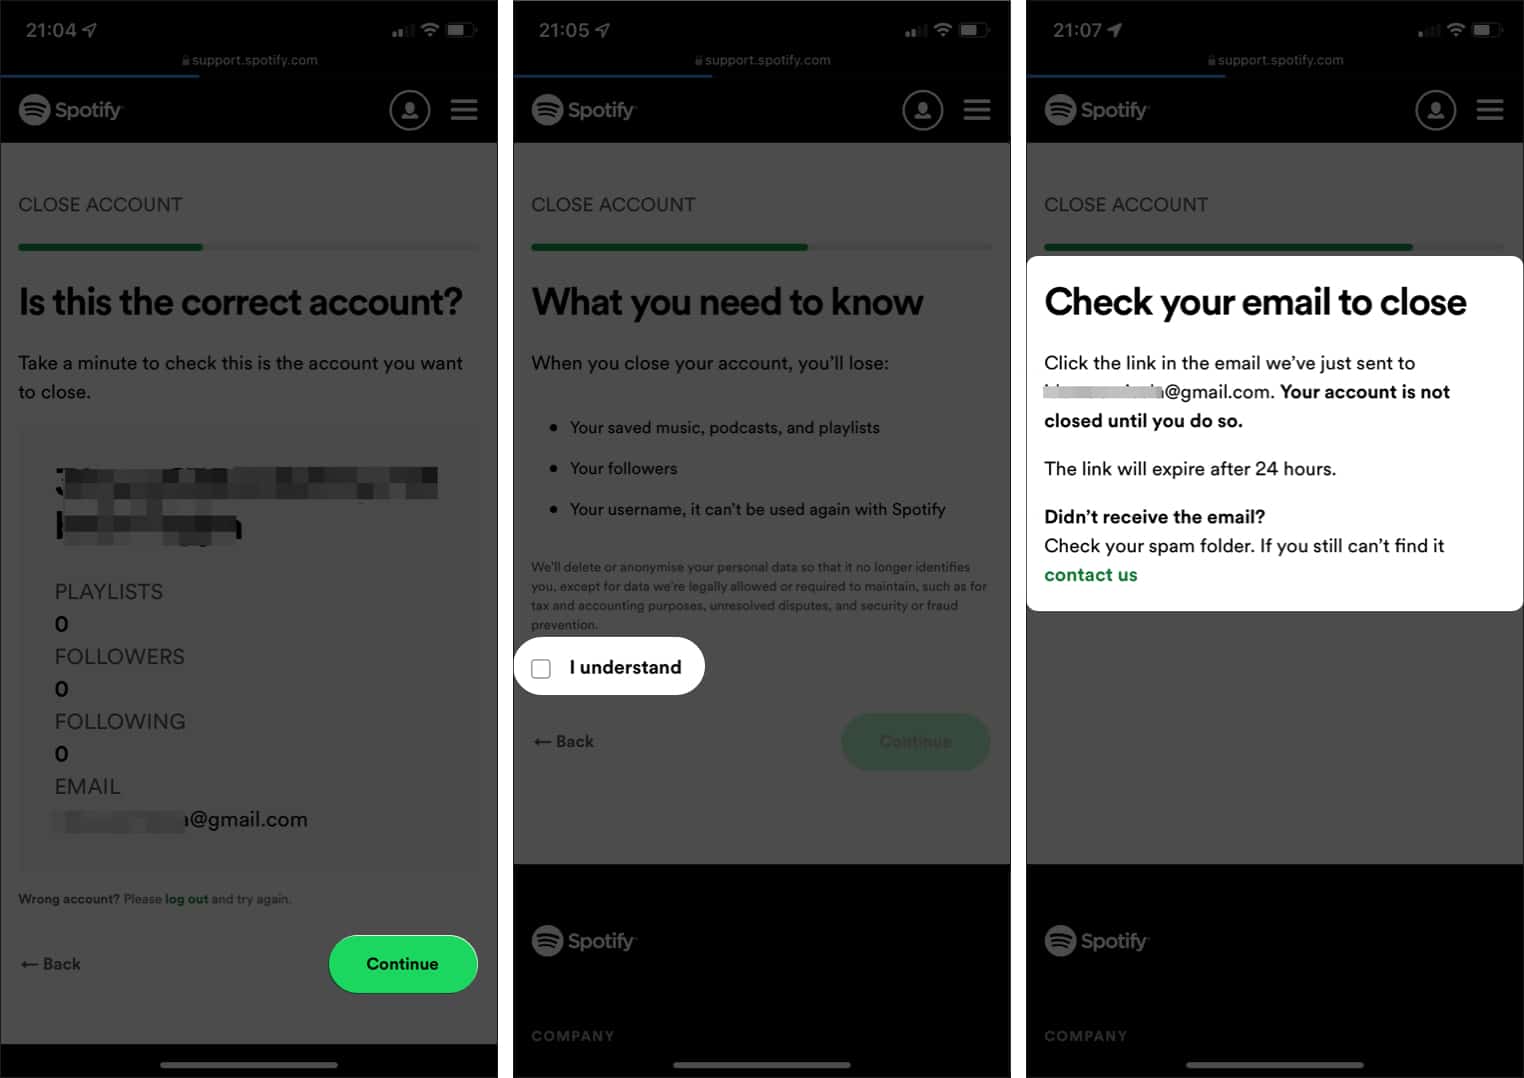 Check email to delete free Spotify account on iPhone